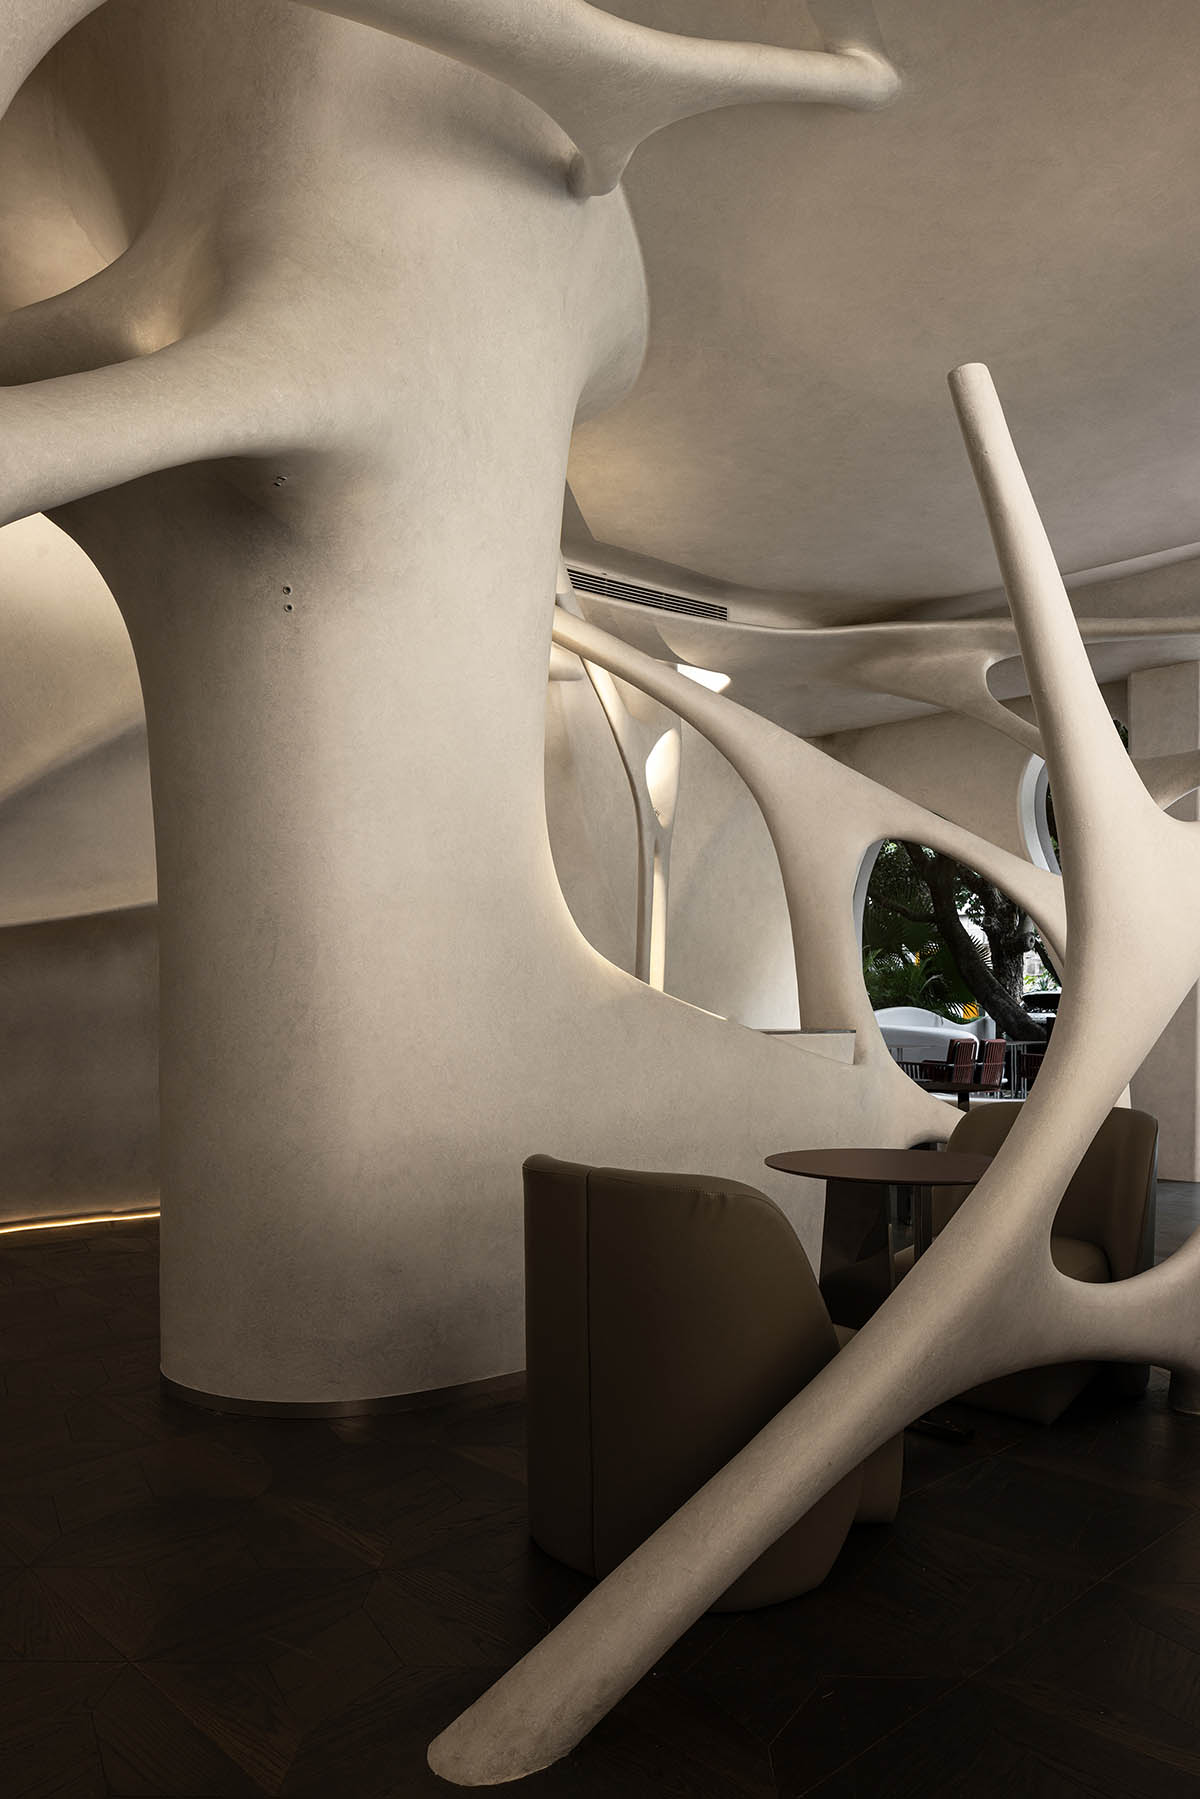 Neuron-like interior by AD ARCHITECTURE combines purity and complexity for cafe and bar in Shenzhen